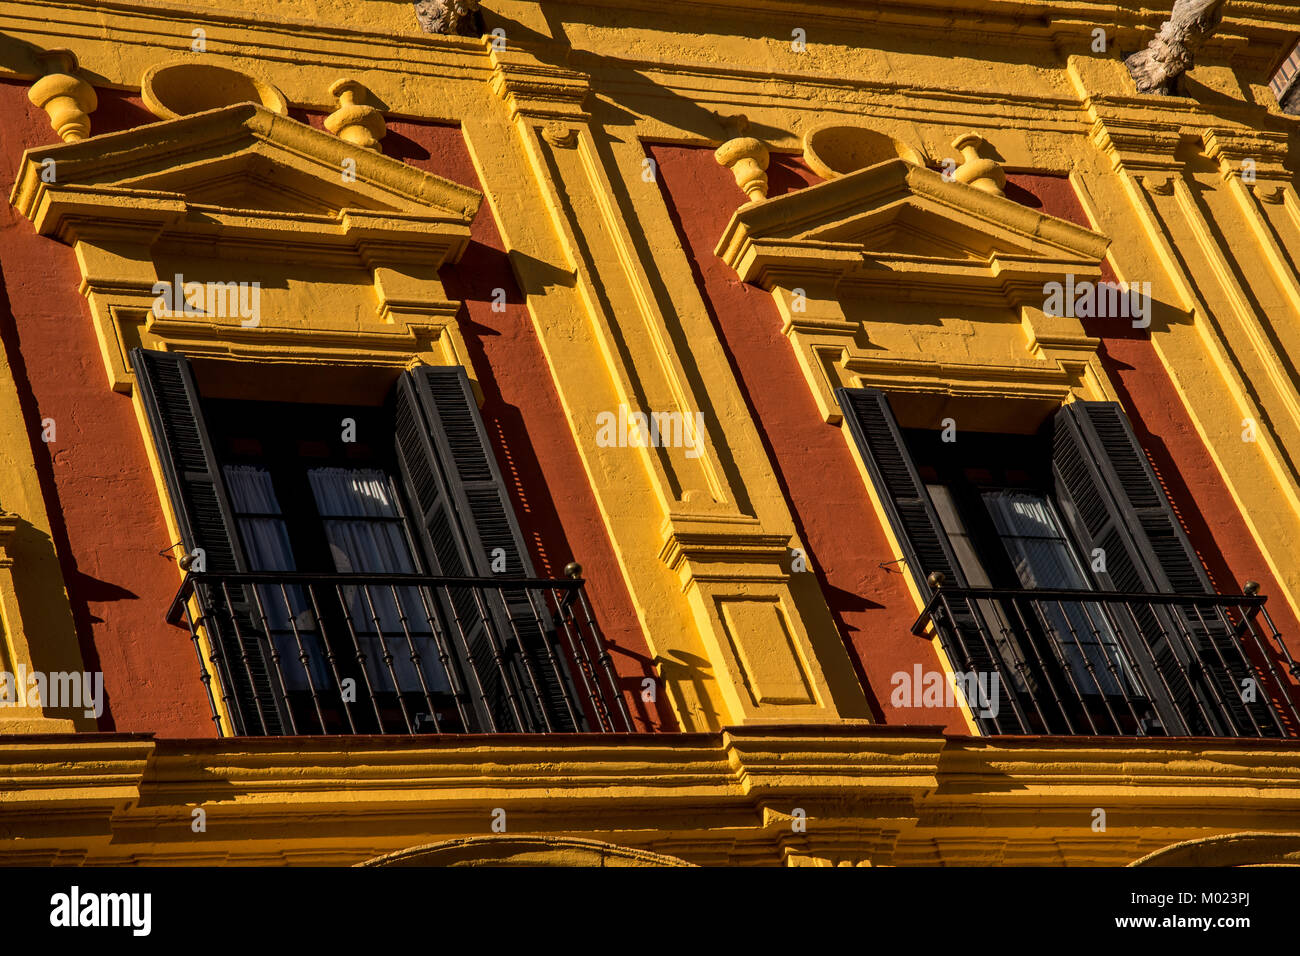 MALAGA, ANDALUSIA / SPAIN - OCTOBER 05 2017: BLACK WINDOW FRAMES ON YELLOW WALL Stock Photo